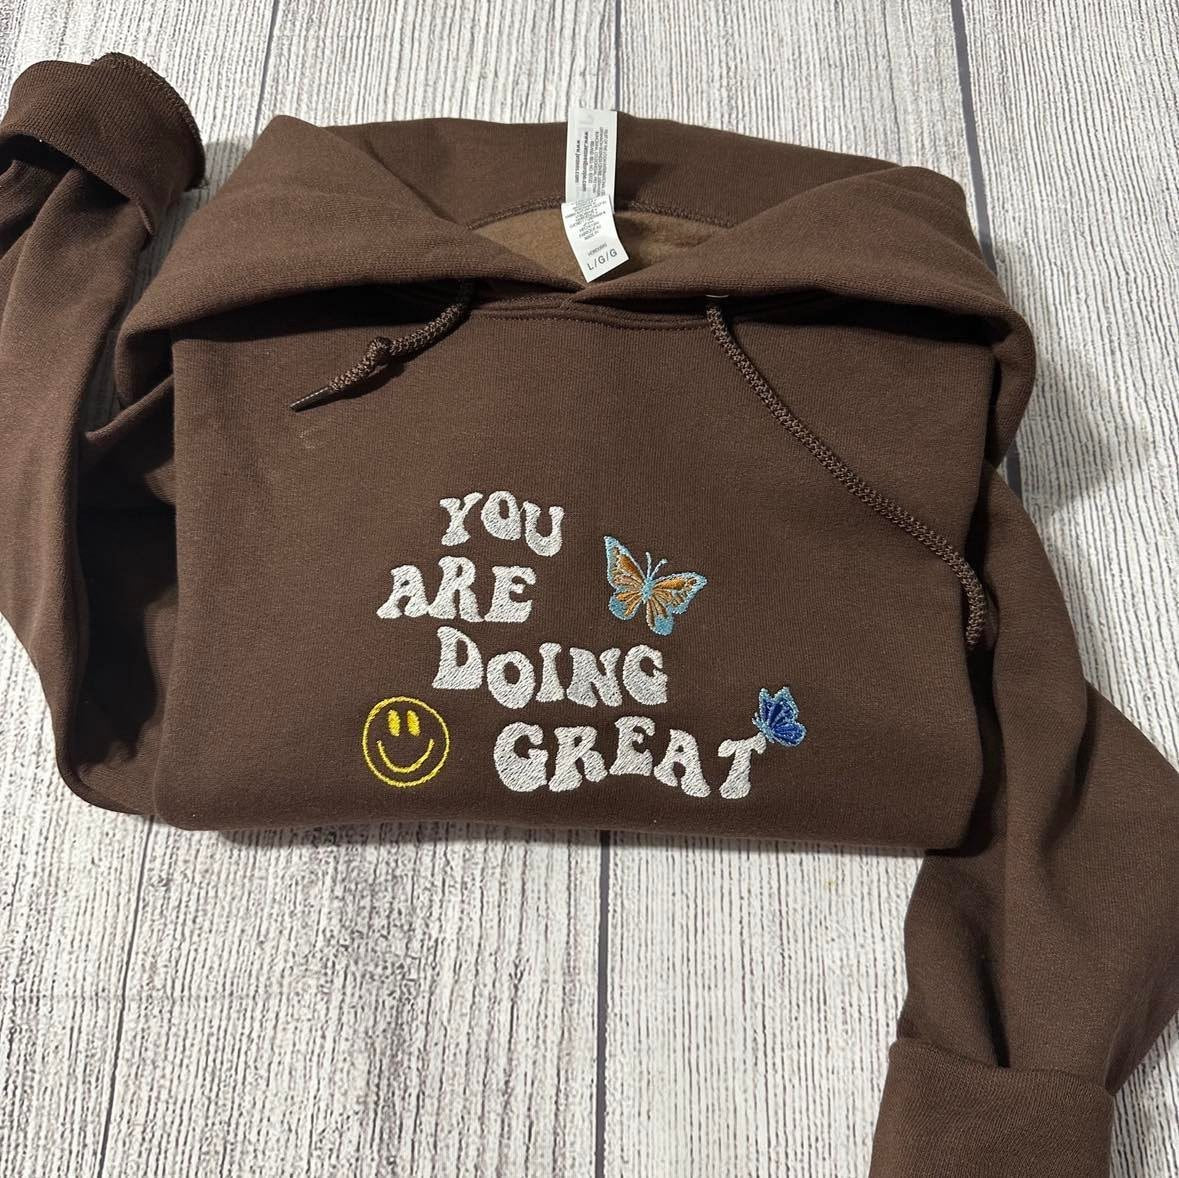 You're doing great Embroidered hoodie; motivating hoodie; inspirational embroidered hoodie; gift for her hoodie - MrEmbroideryGifts